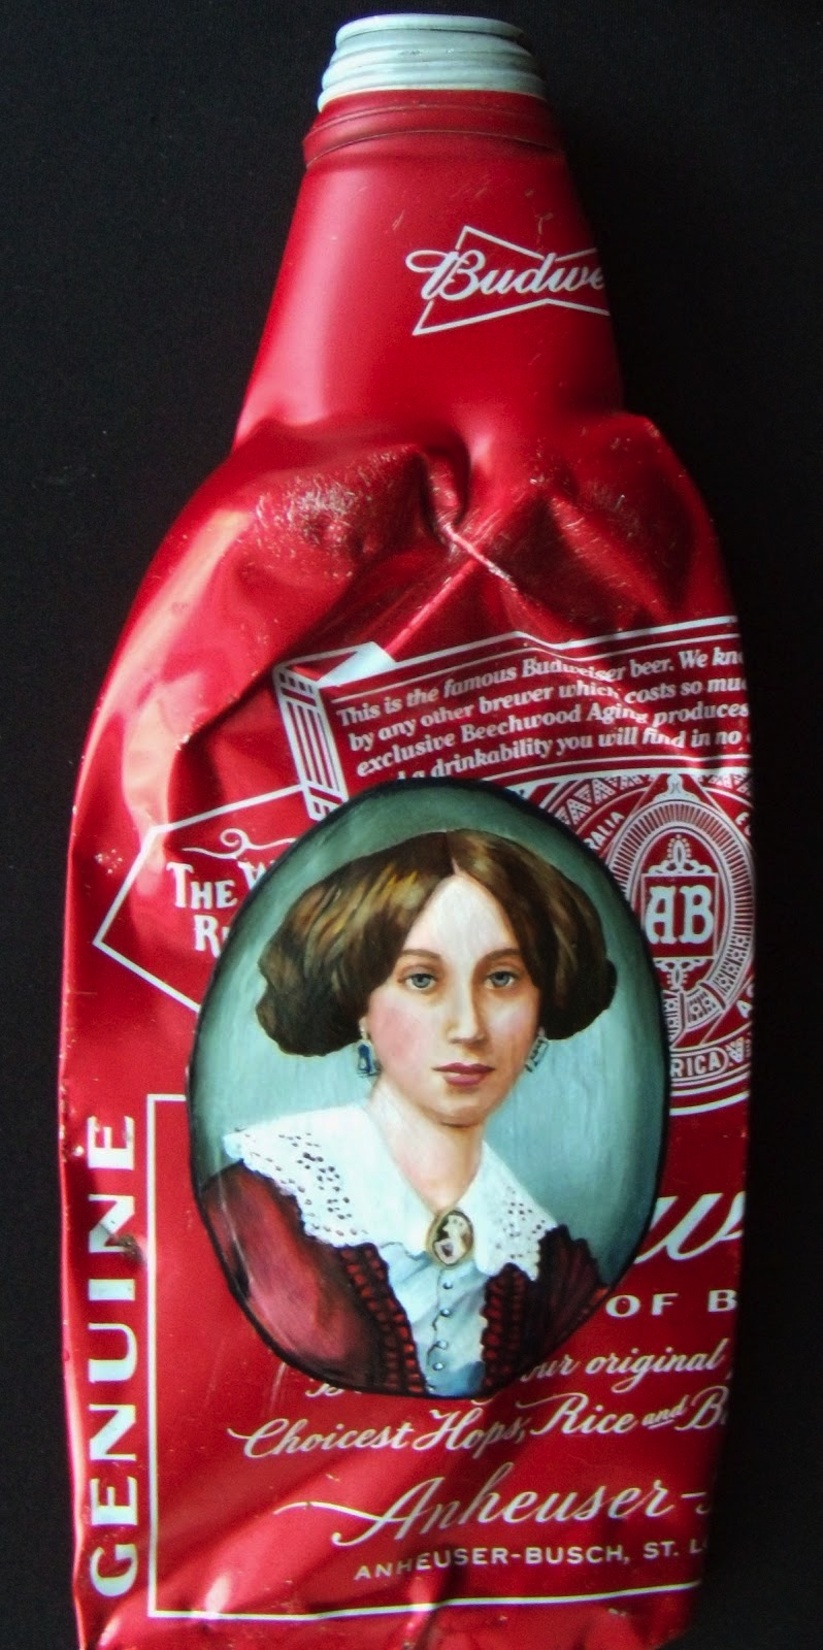 New_Historical_Portraits_on_Flattened_Cans_by_Kim_Alsbrooks_2015_08